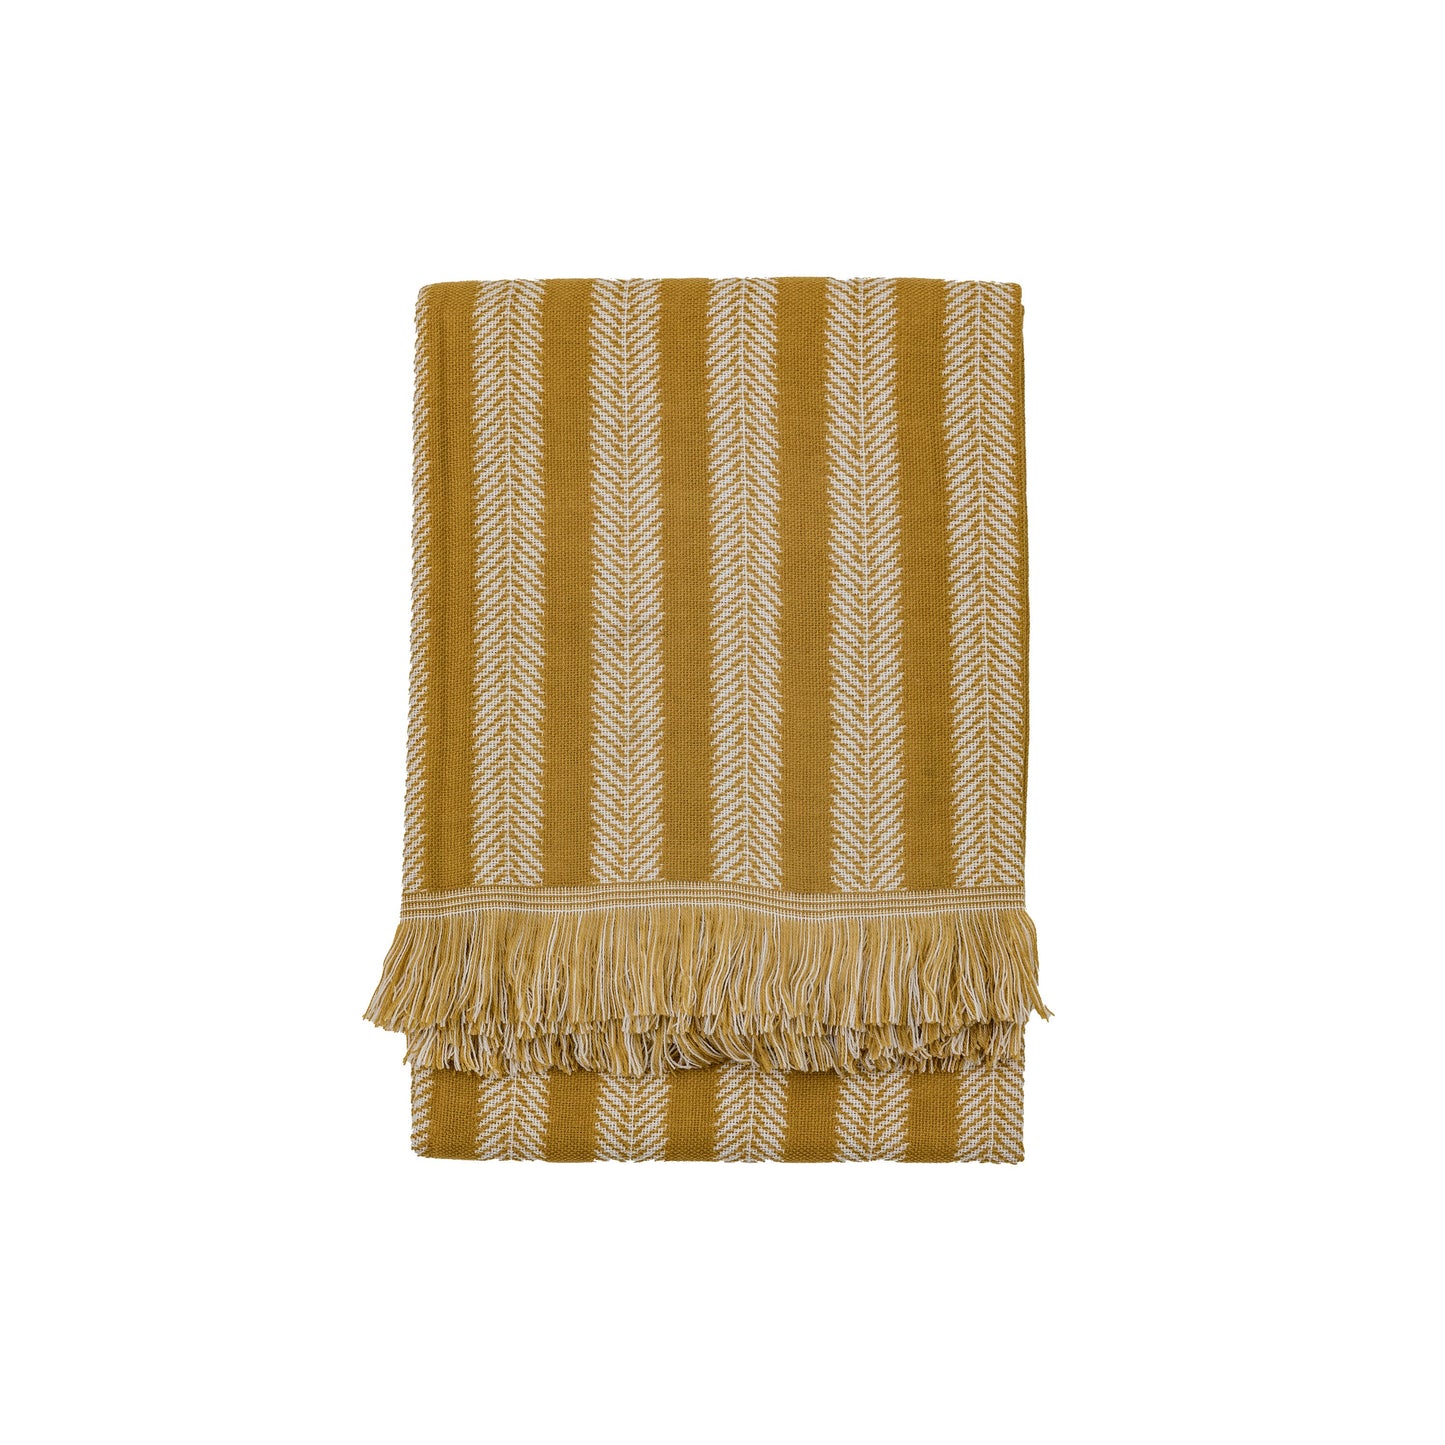 Jacquard Weave Throw with Fringe Ochre 1300x1700mm